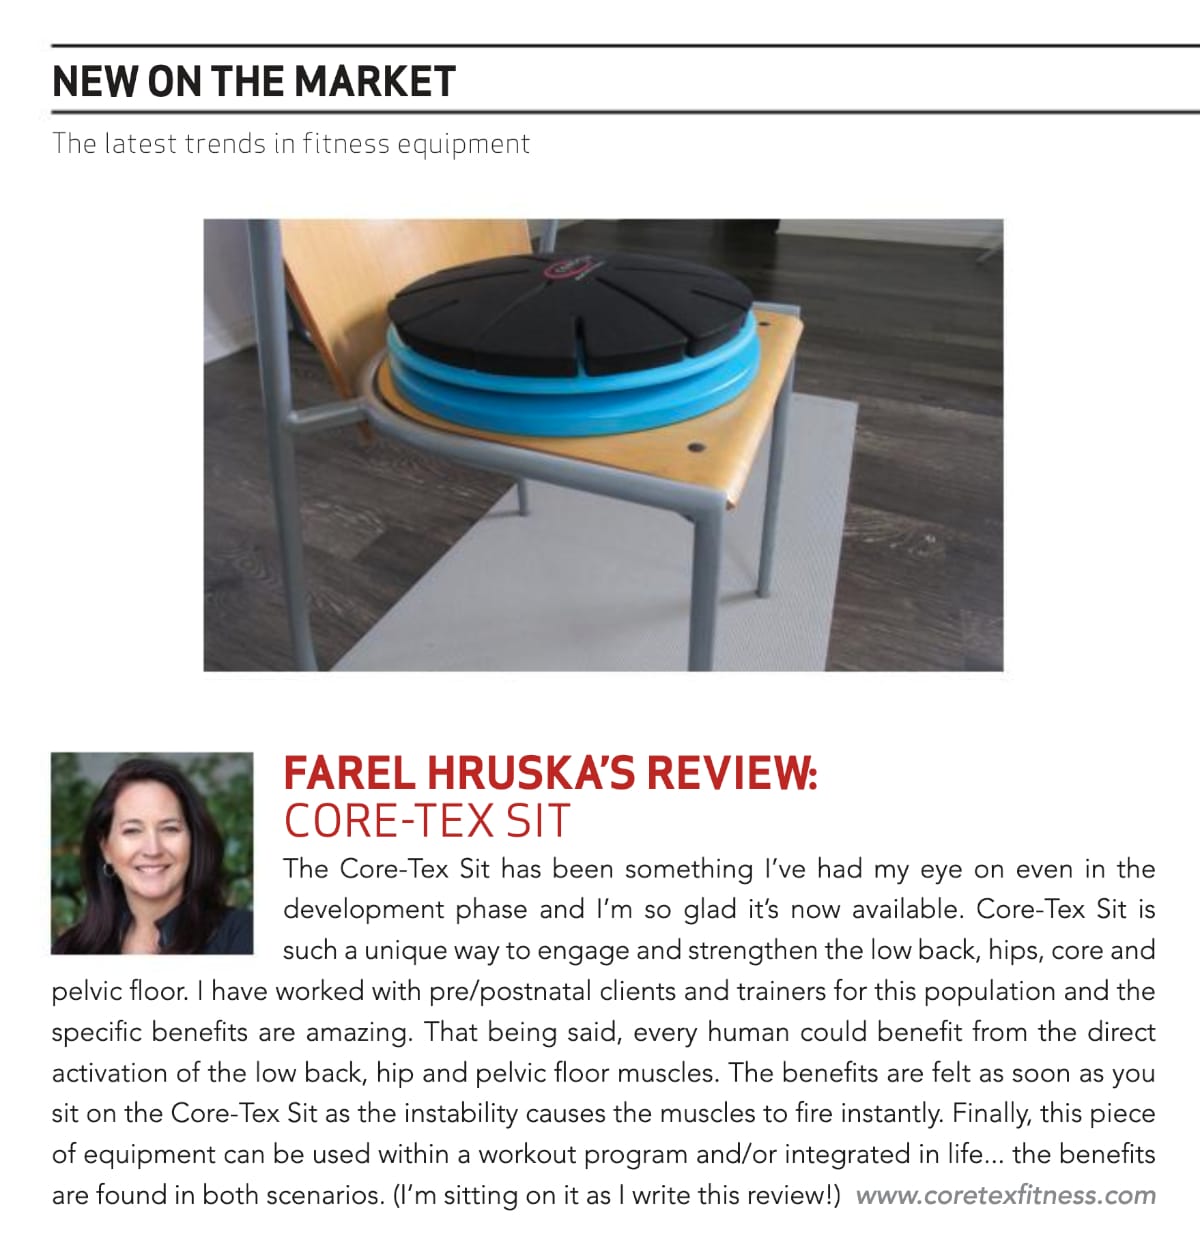 Core-Tex Sit Review by Farel Hruska in the Summer 2021 edition of Personal Fitness Professional